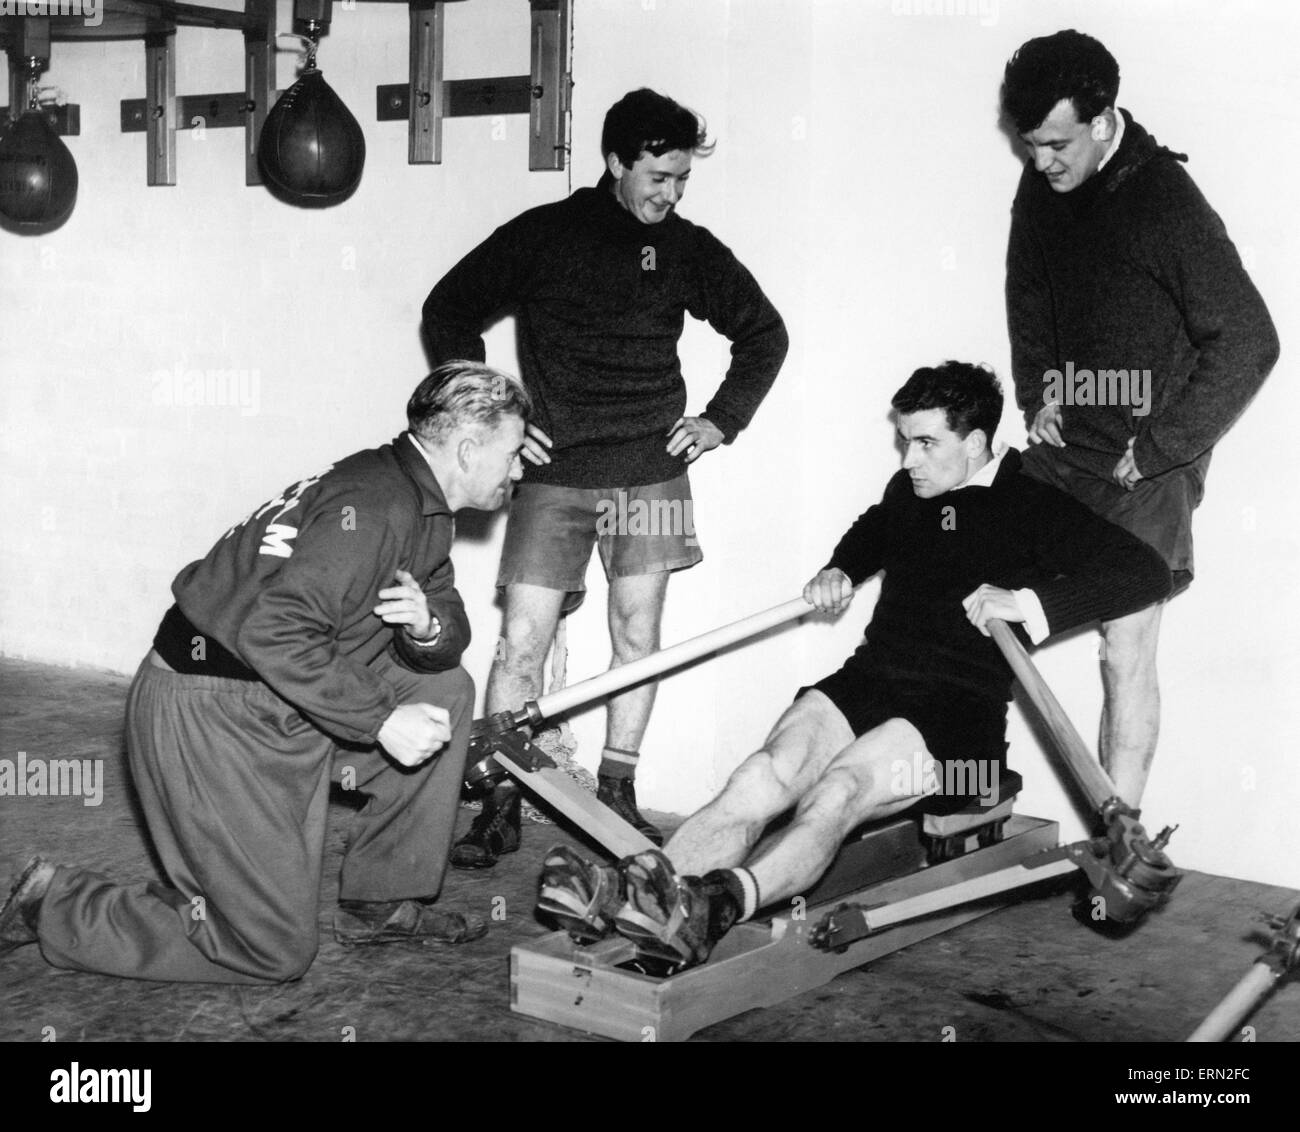 Birmingham City footballer Eddie Brown takes the strain on the rowing machine watched by coach Ray Shaw and teammates Jeff Hall and Trevorr Smith during training.  27th October 1956. Stock Photo